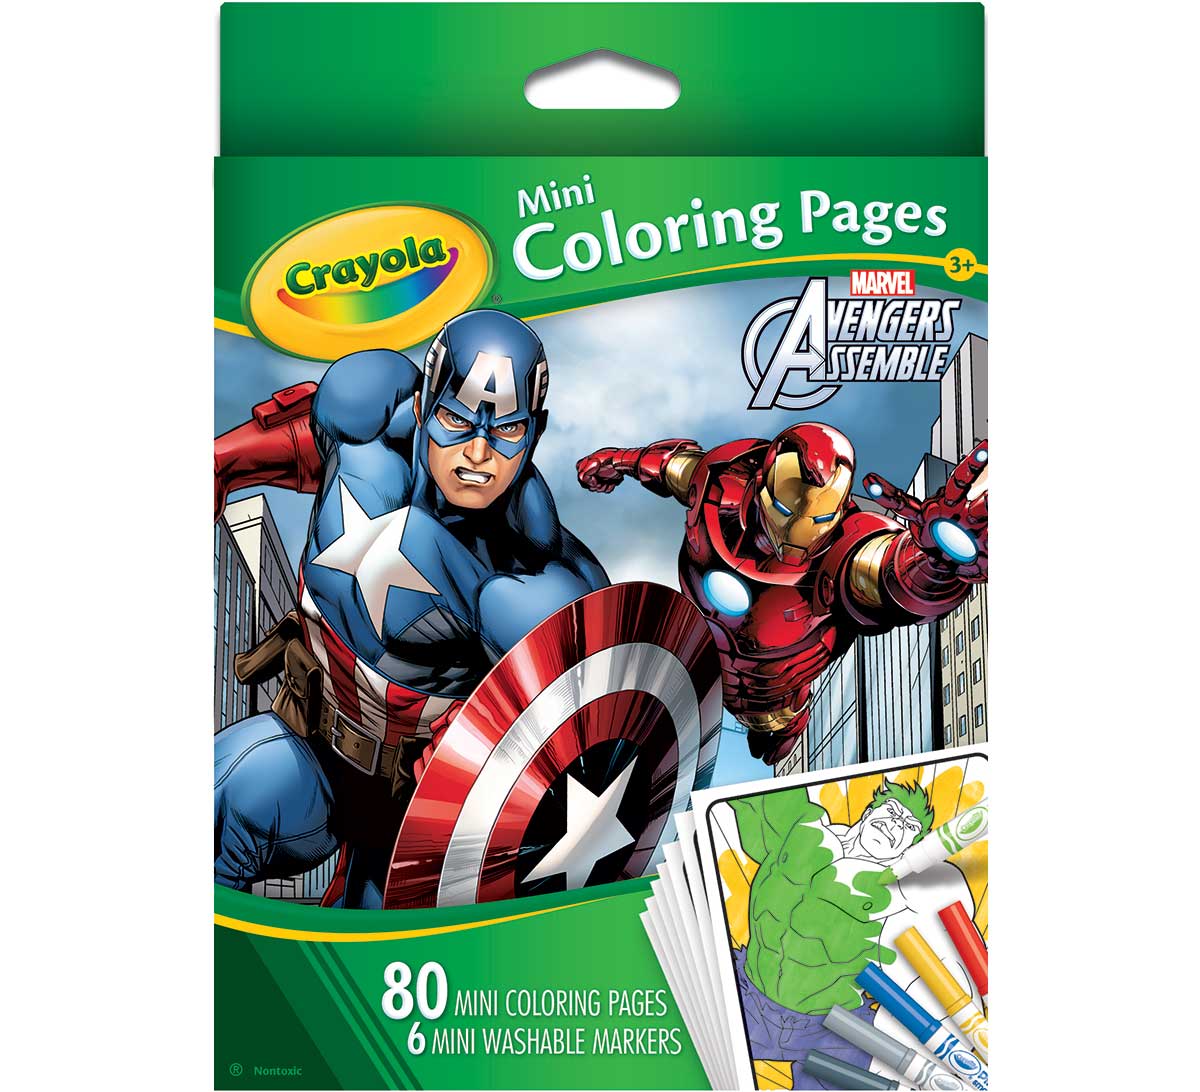 Download Avengers Mini Coloring Pages | Crayola